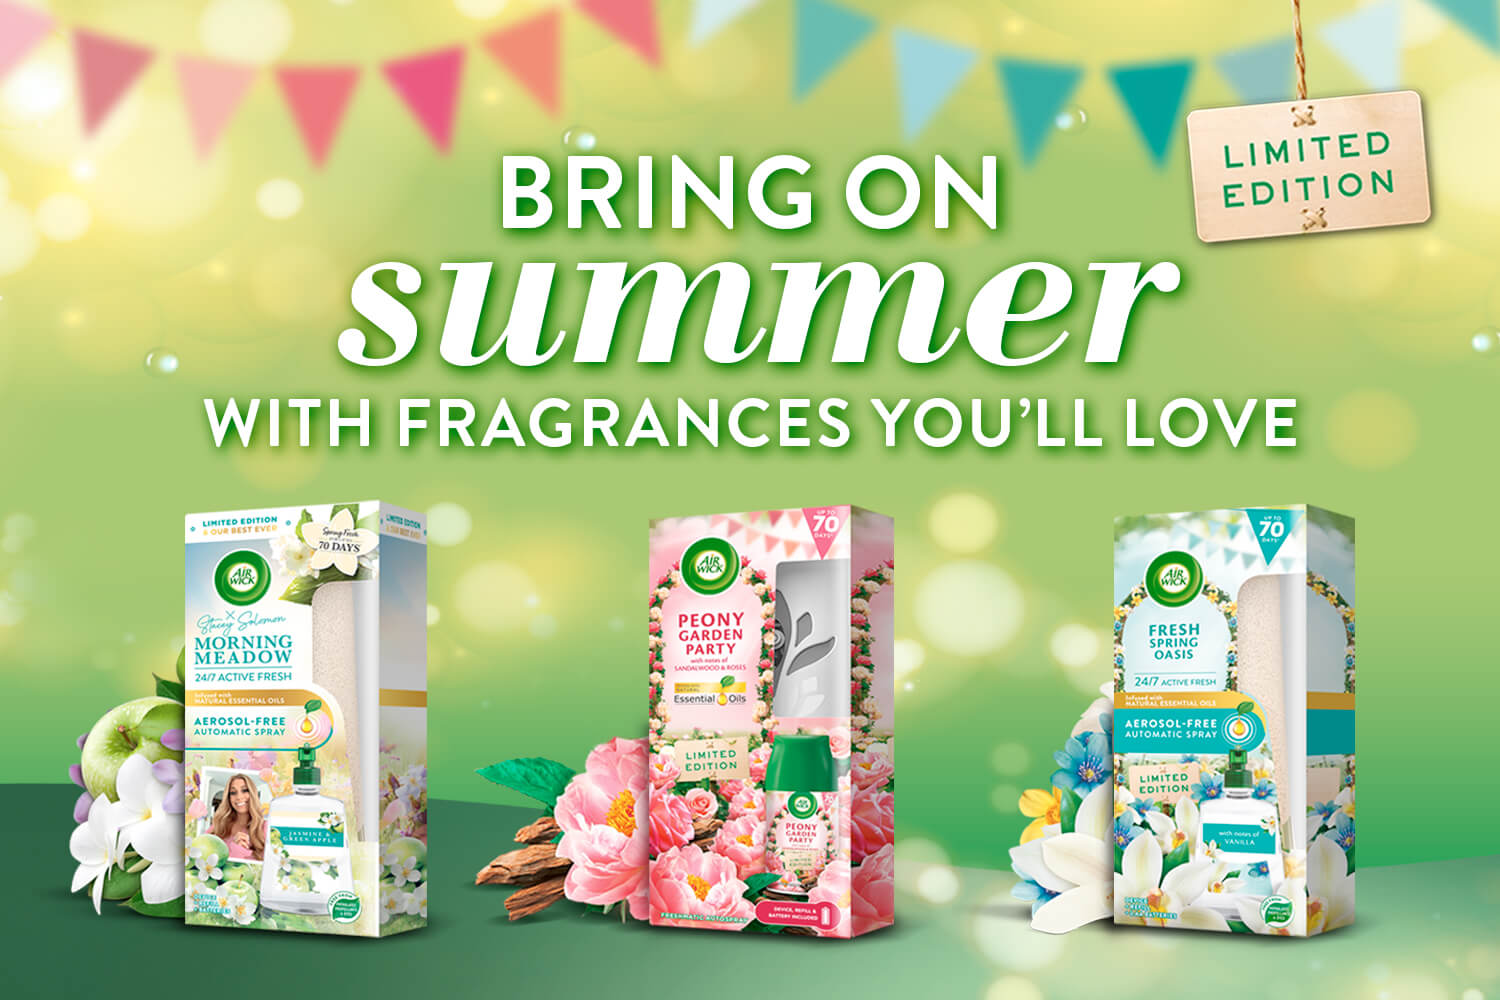 Bring on summer with fragrances you’ll love